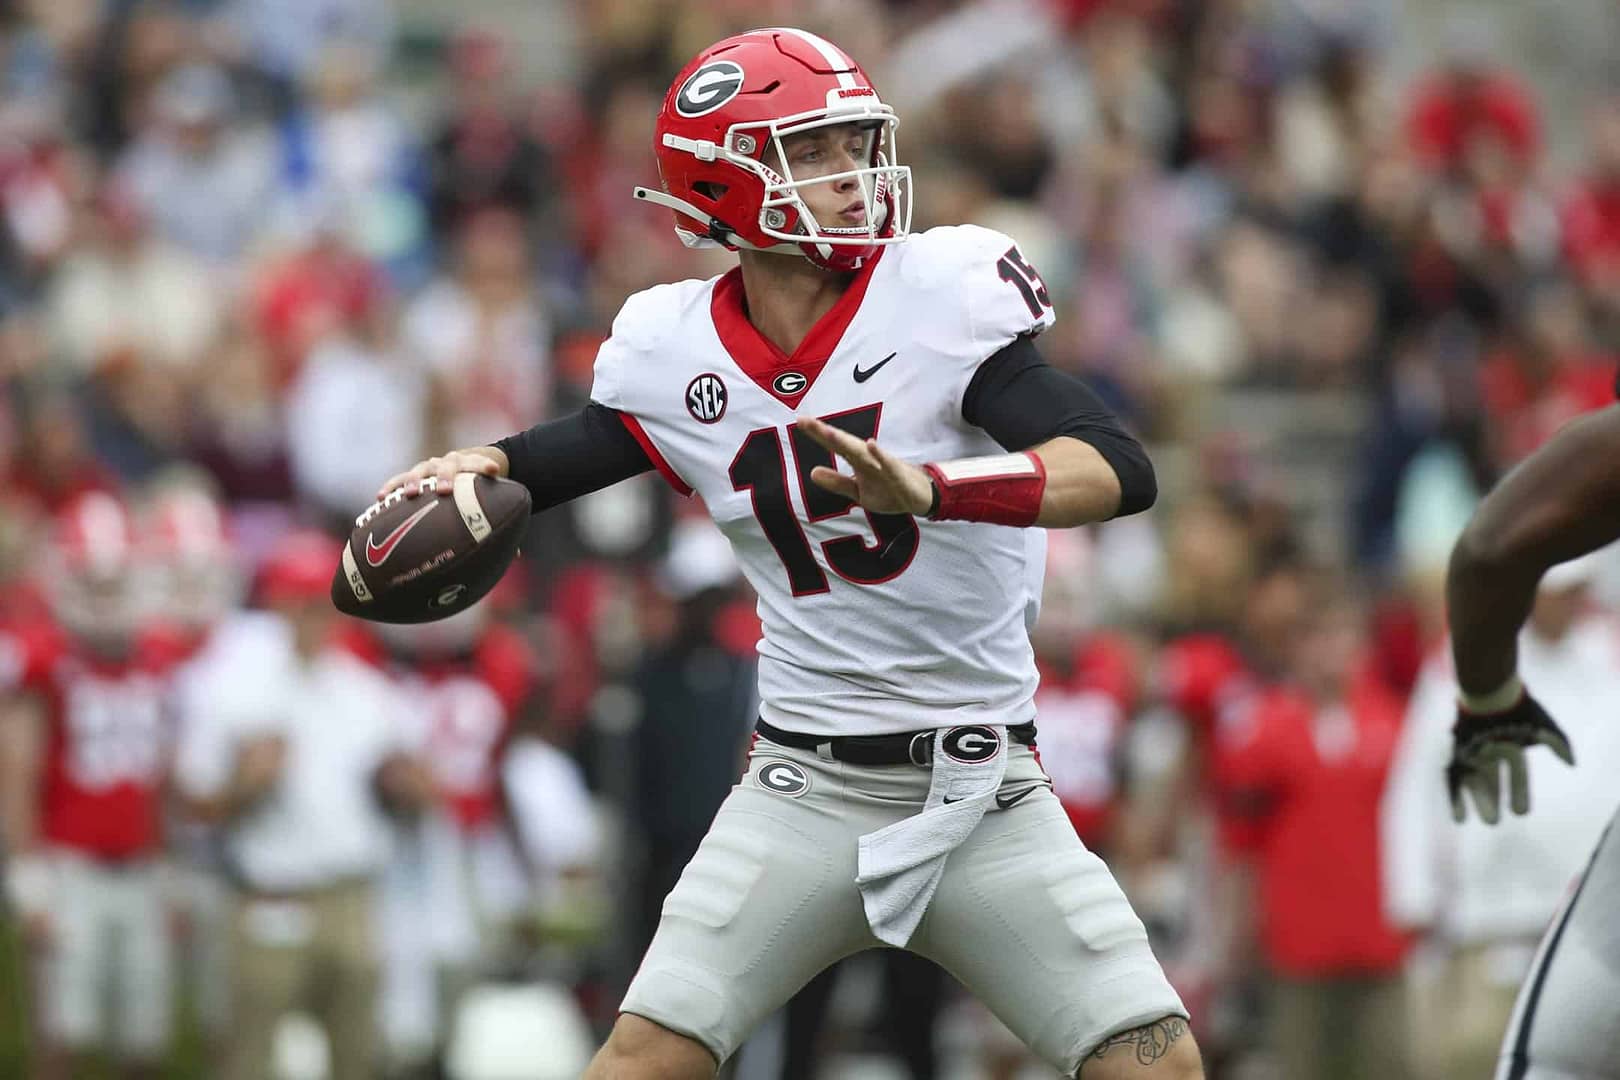 Let's dive into our SEC Championship pick and prediction for Alabama-Georgia, with an eye to the odds boost at DraftKings...